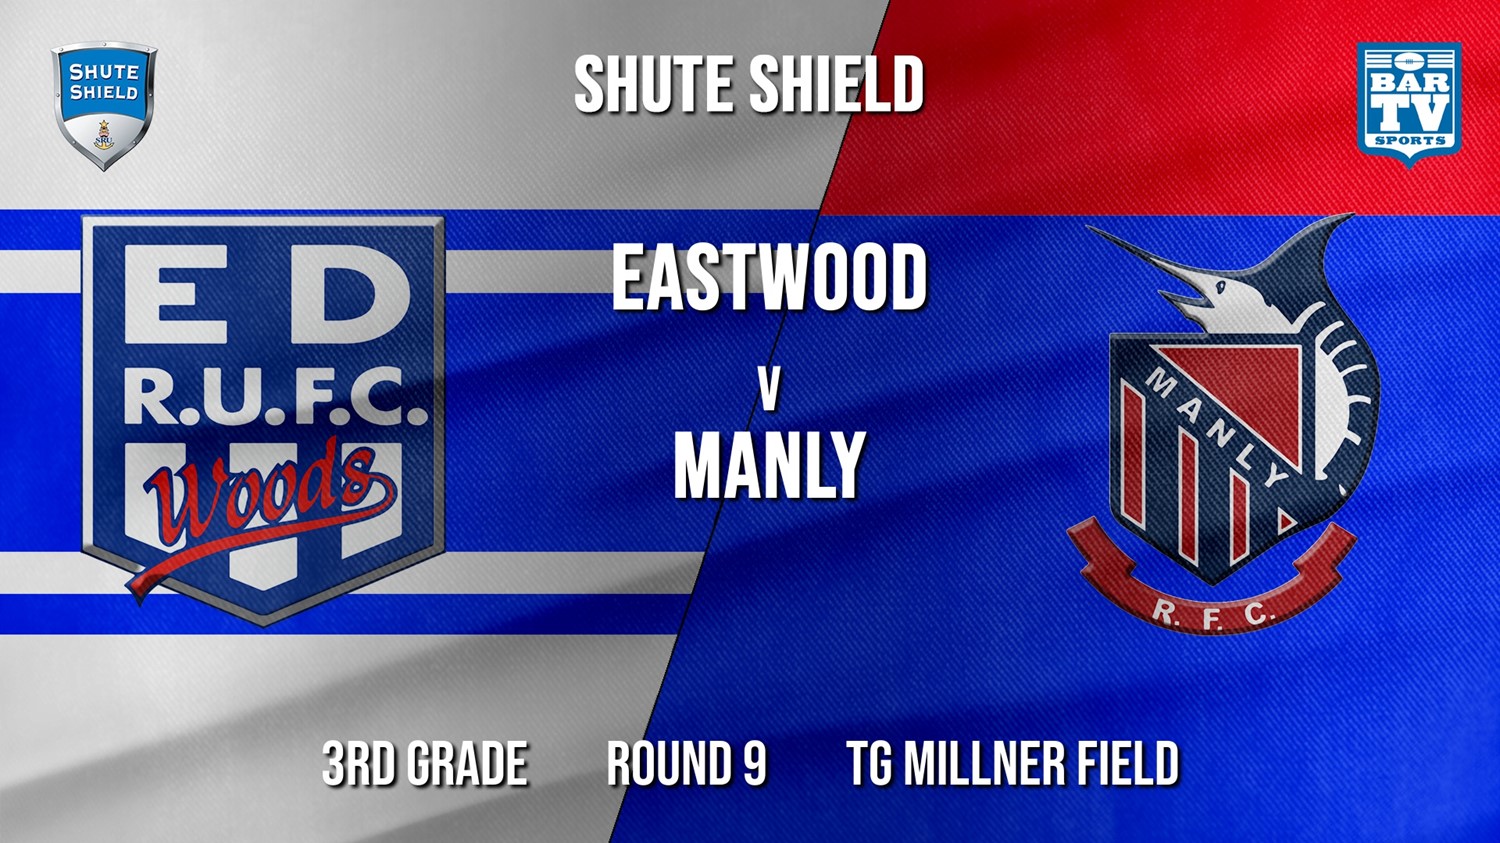 Shute Shield Round 9 - 3rd Grade - Eastwood v Manly Minigame Slate Image